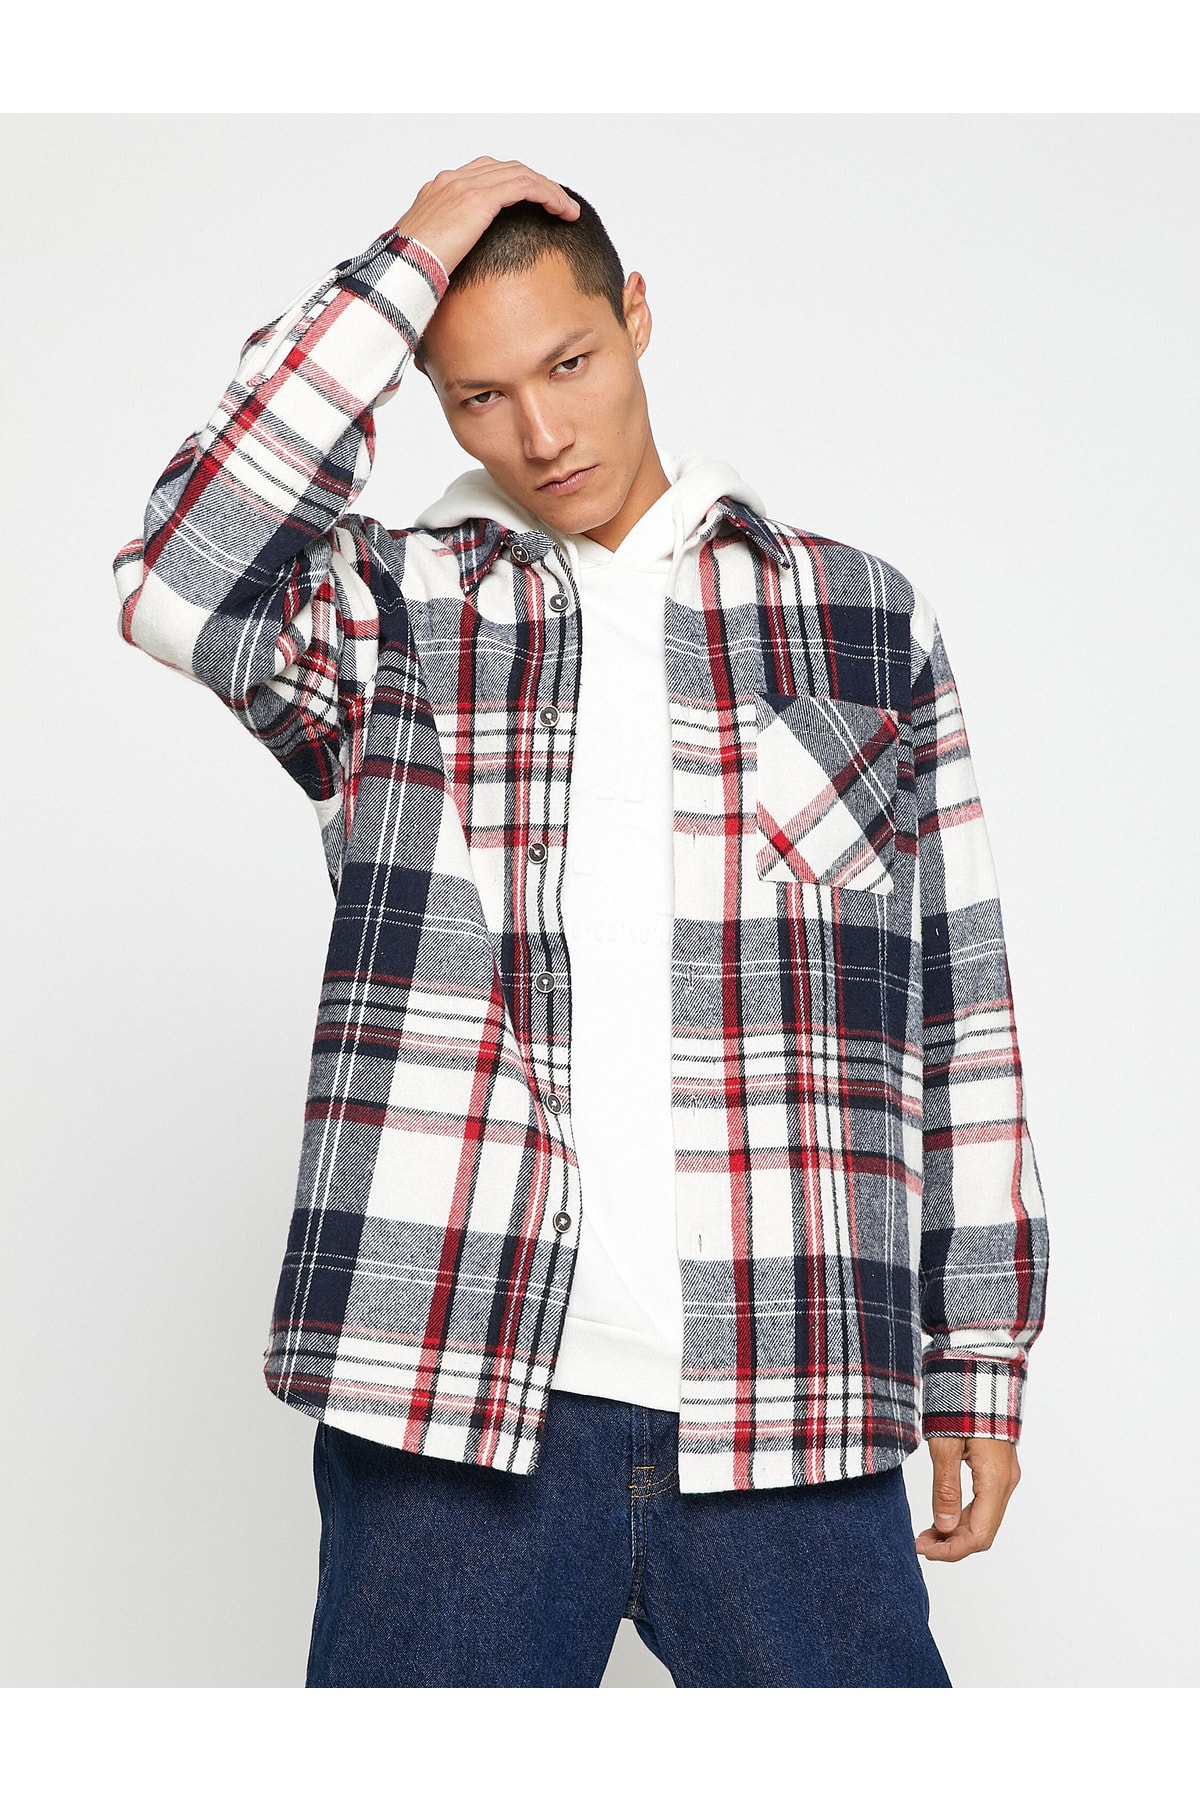 KOTON Checked Lumberjack Shirt with a Classic Collar, Pocket Detailed, Long Sleeves